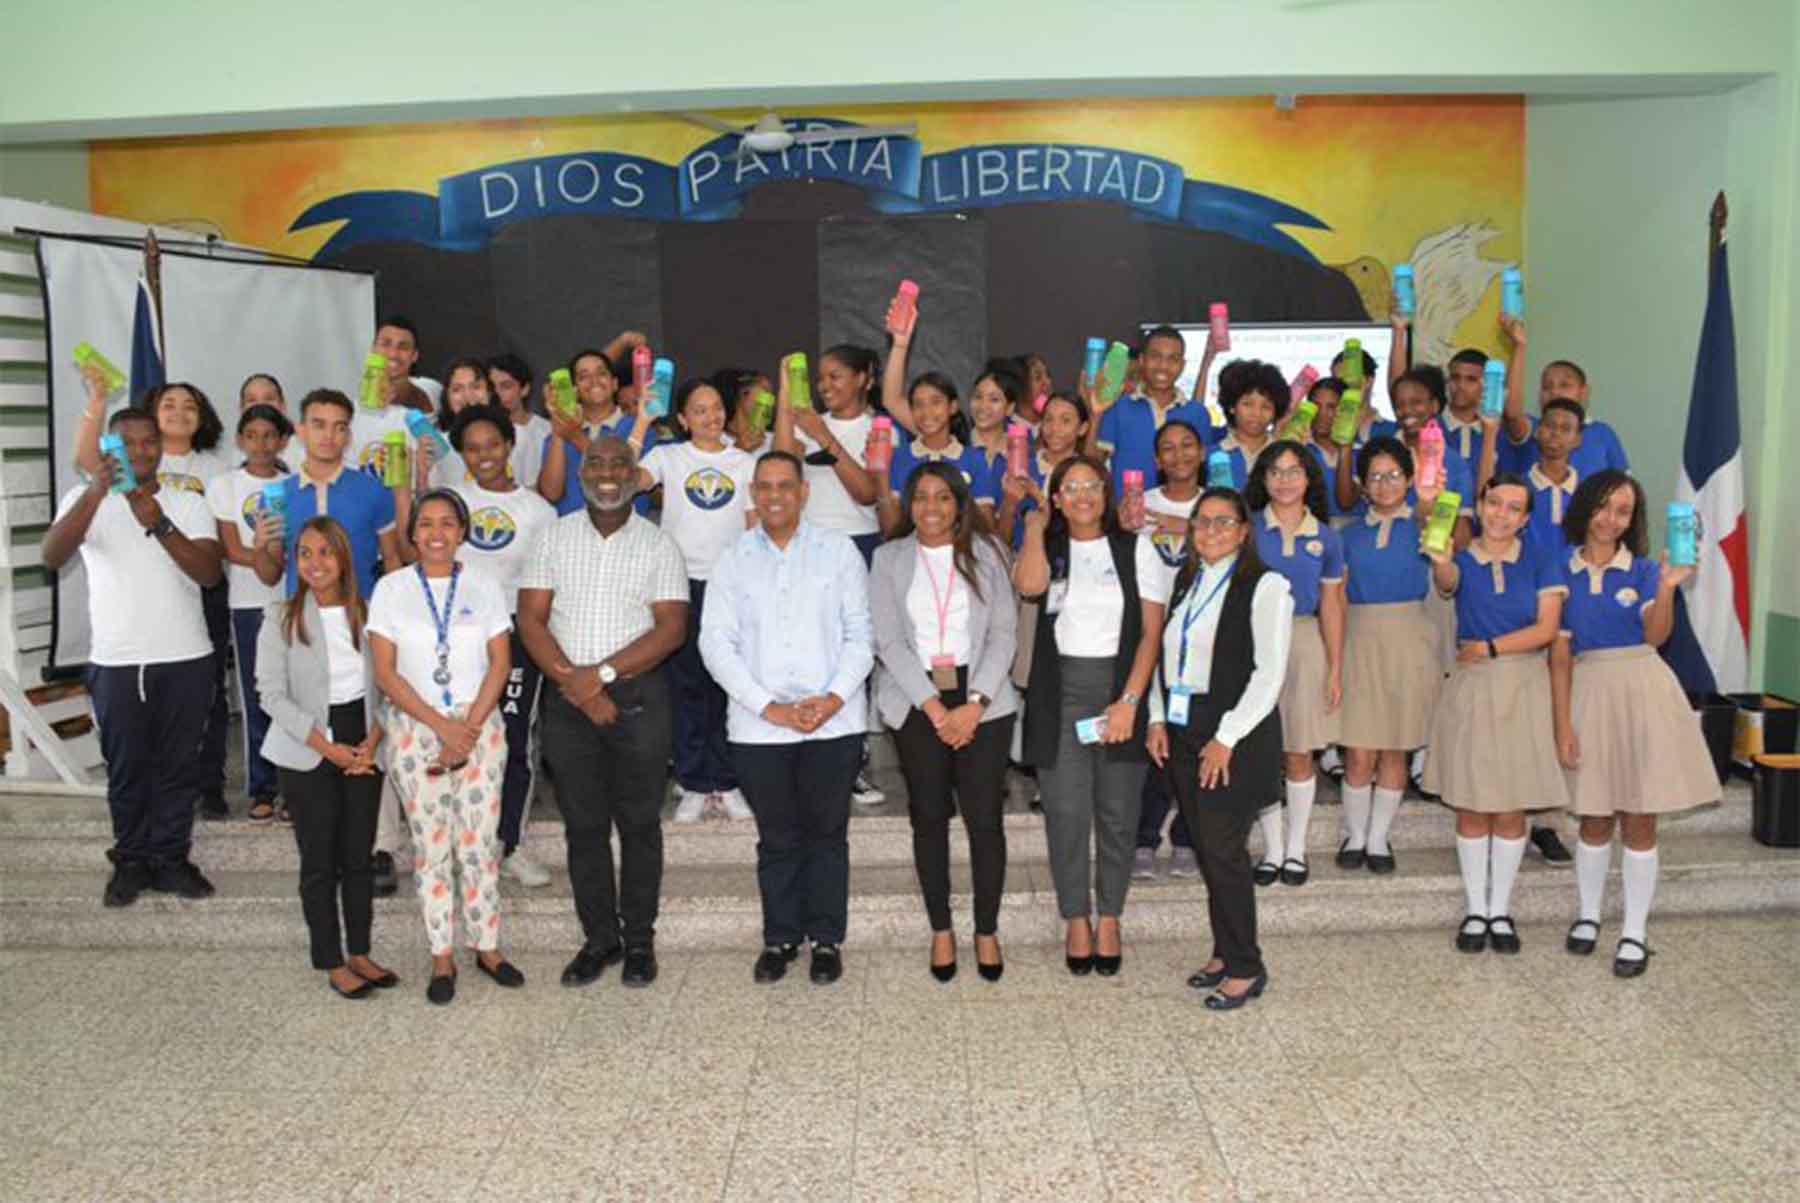 The Minister of the Economy provides 3Rs training to high school students in the USA